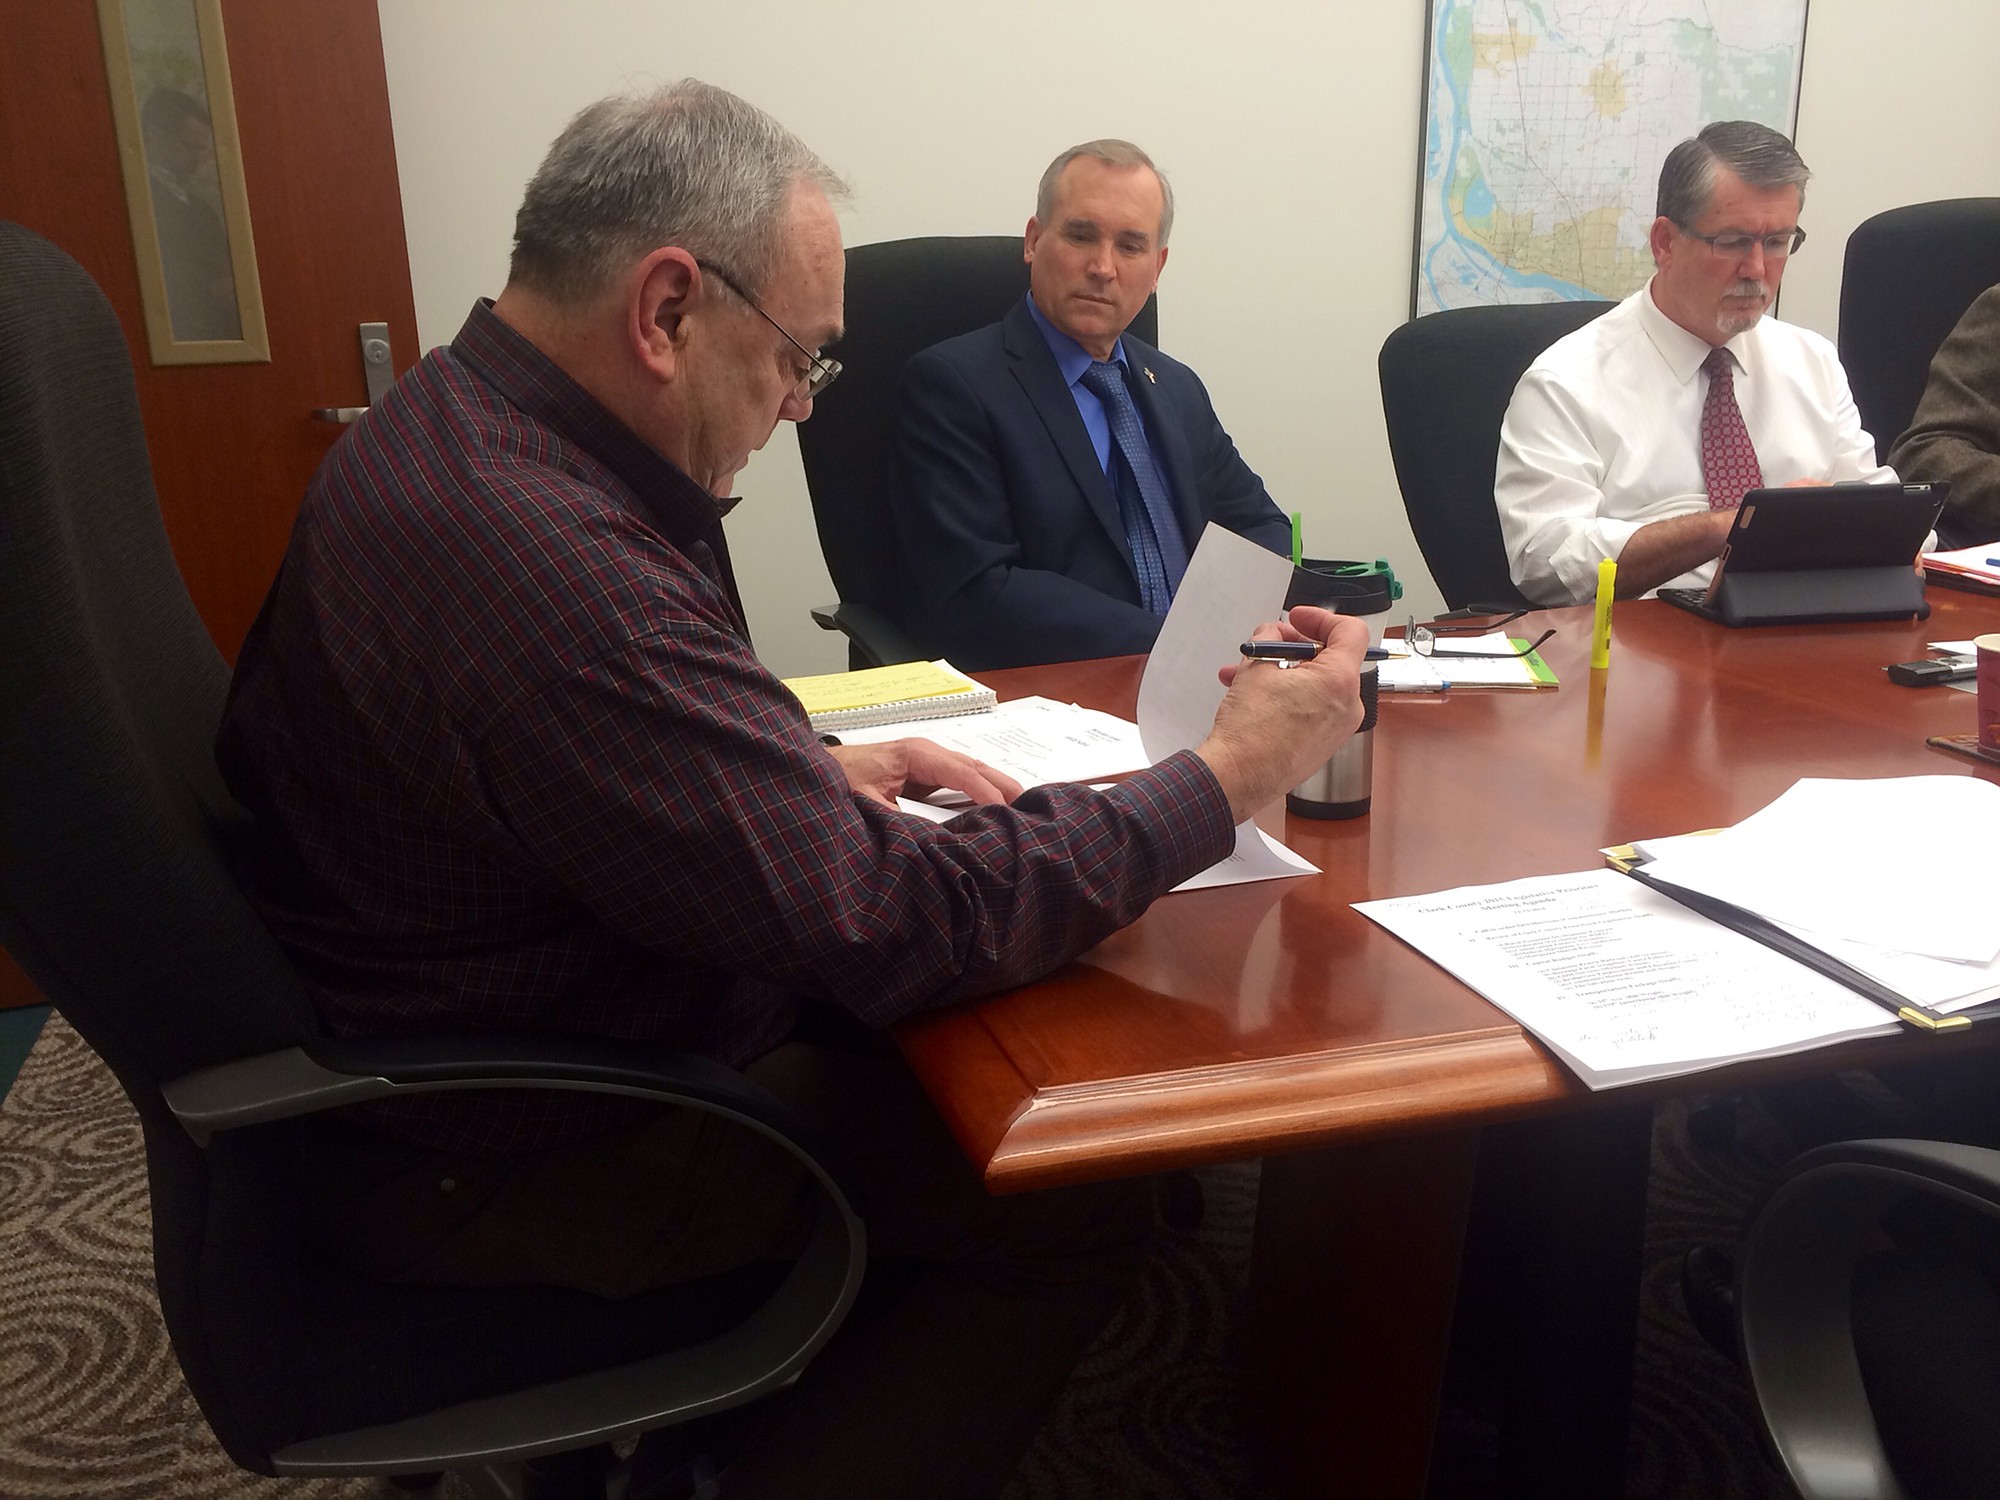 Clark County Administrator Mark McCauley, right, shown here in a file photo, accepted the job of county manager today under a contract approved by Commissioners Tom Mielke, left, David Madore, center, and Jeanne Stewart, not shown.